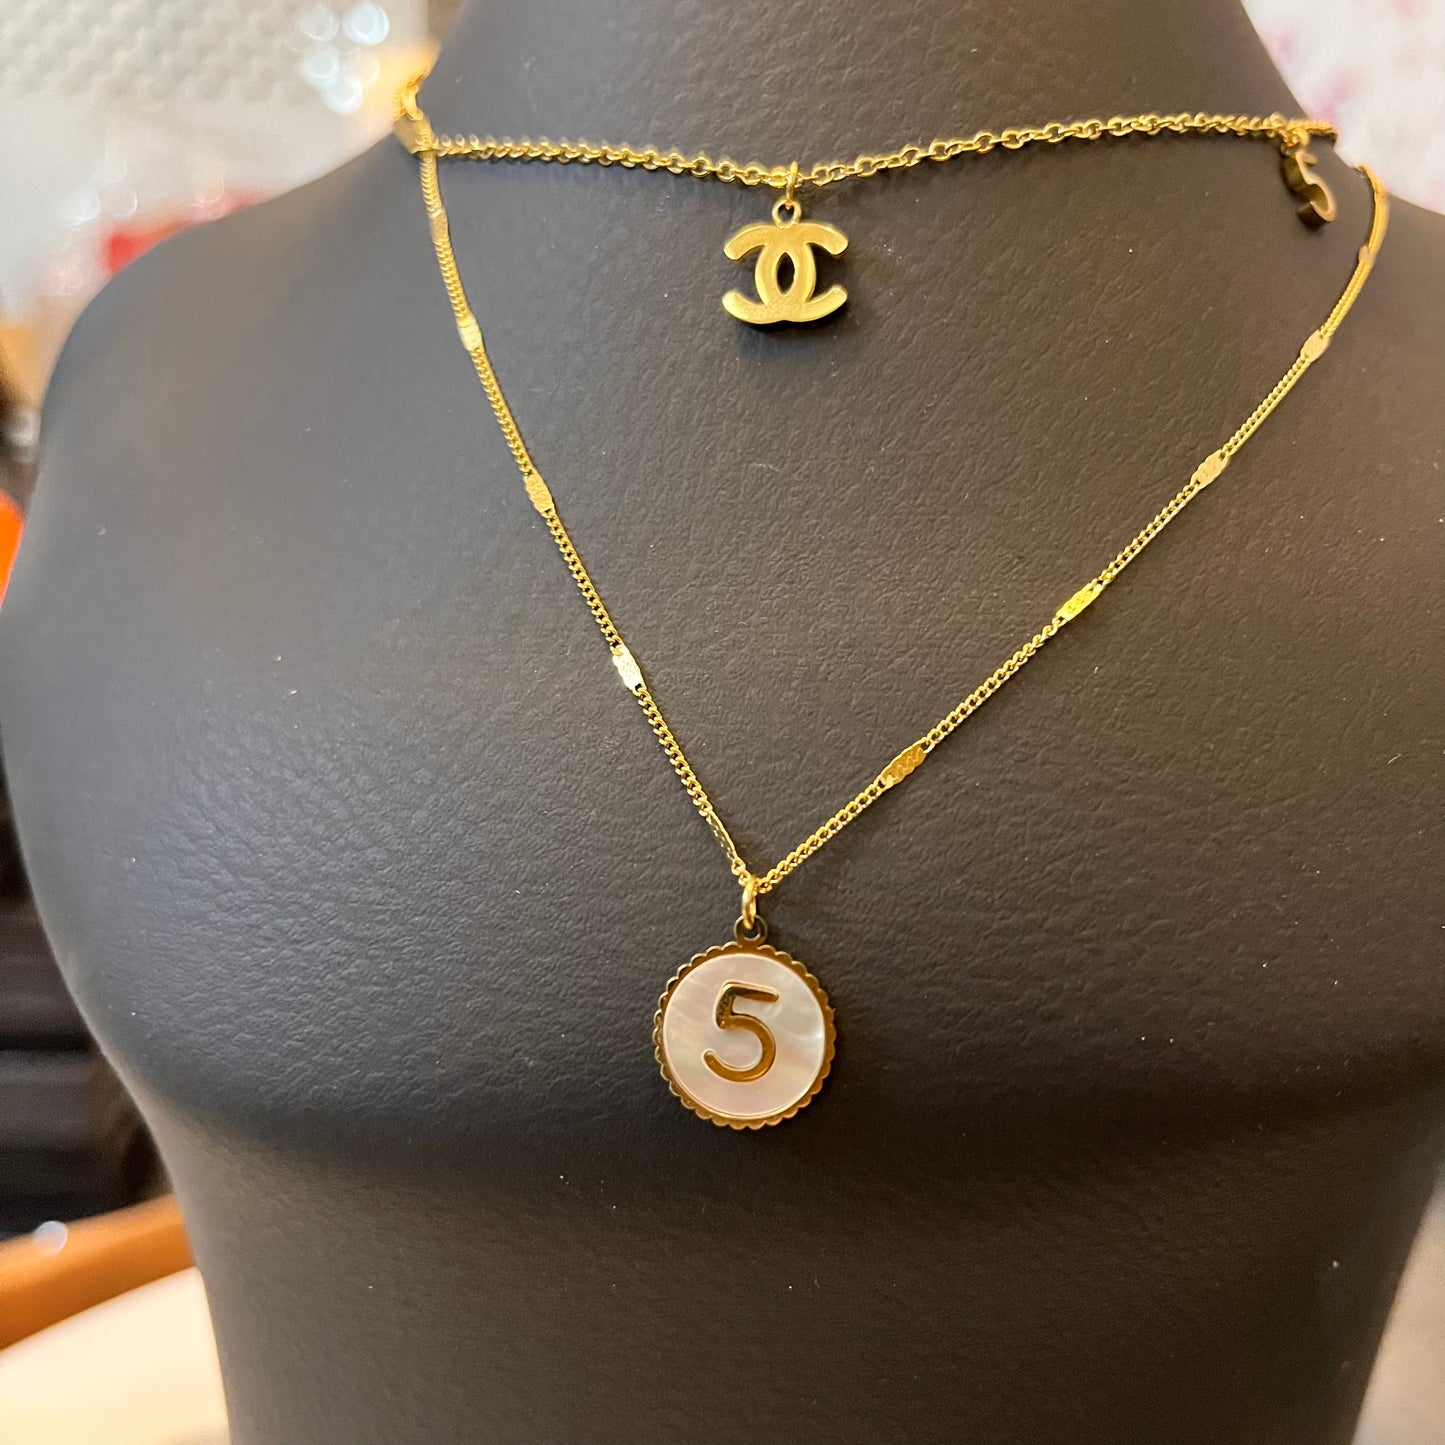 Chanel 5 Signature Style Necklace